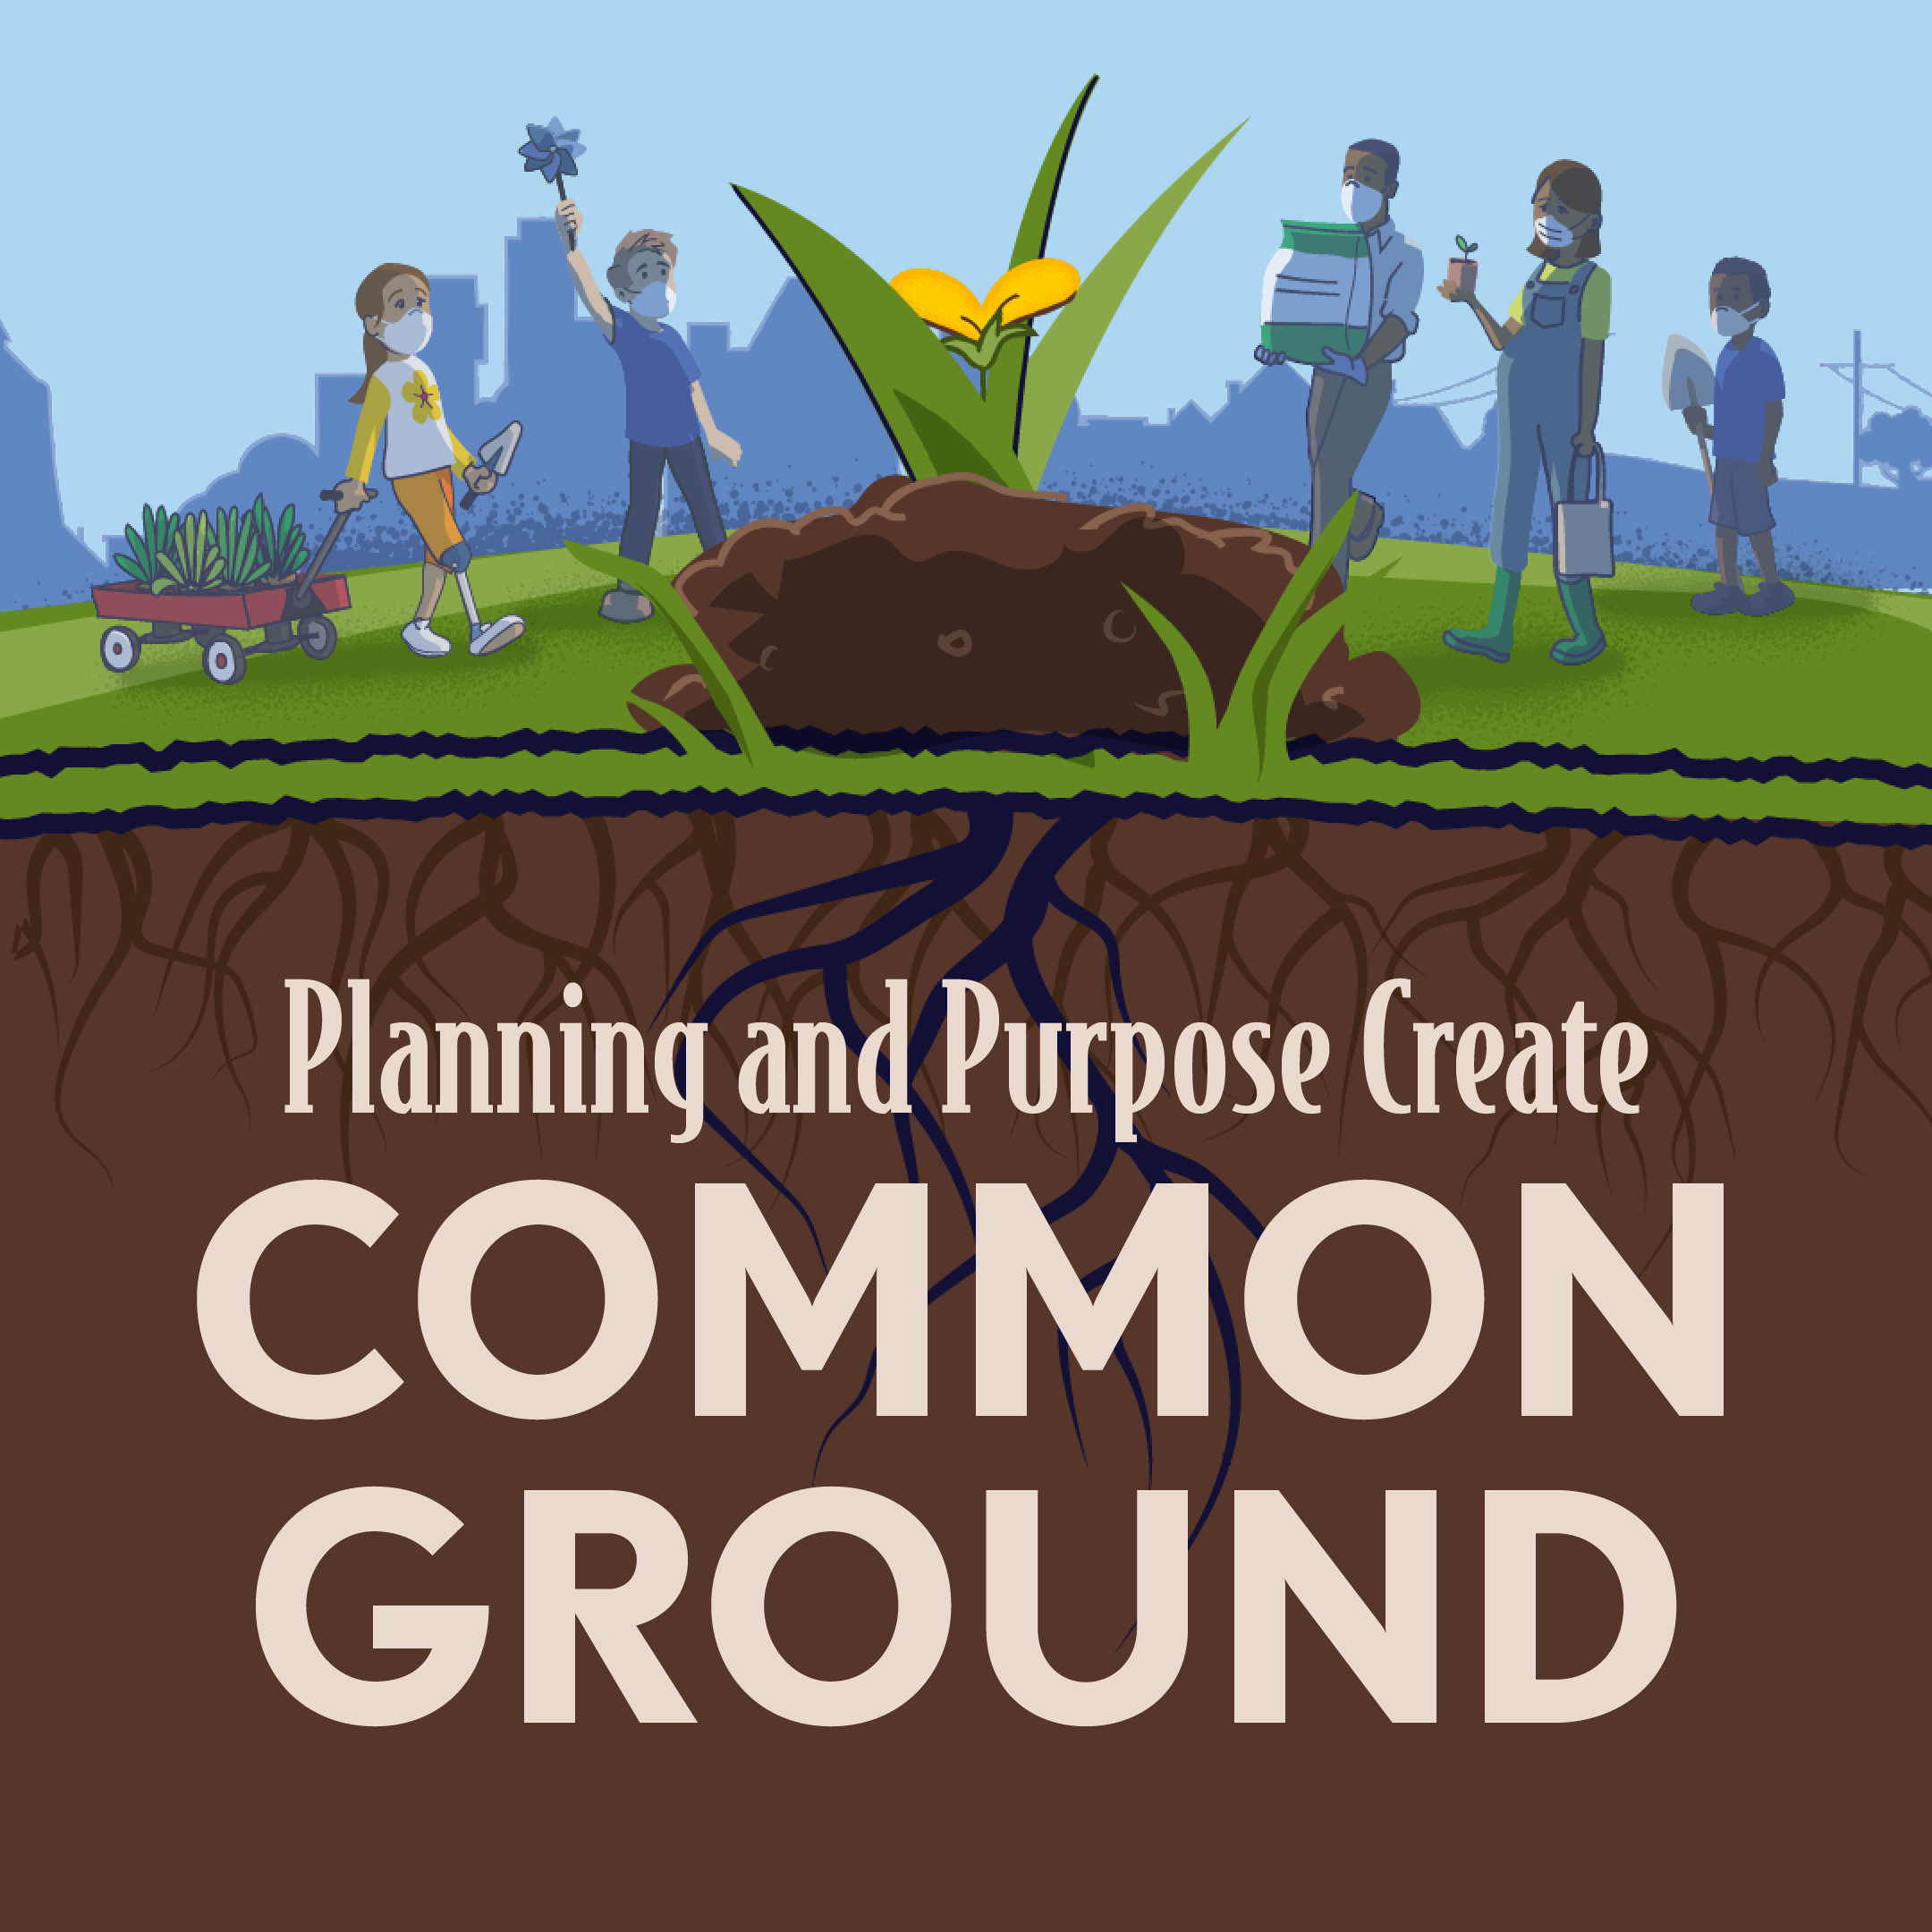 Planning and purpose create common ground